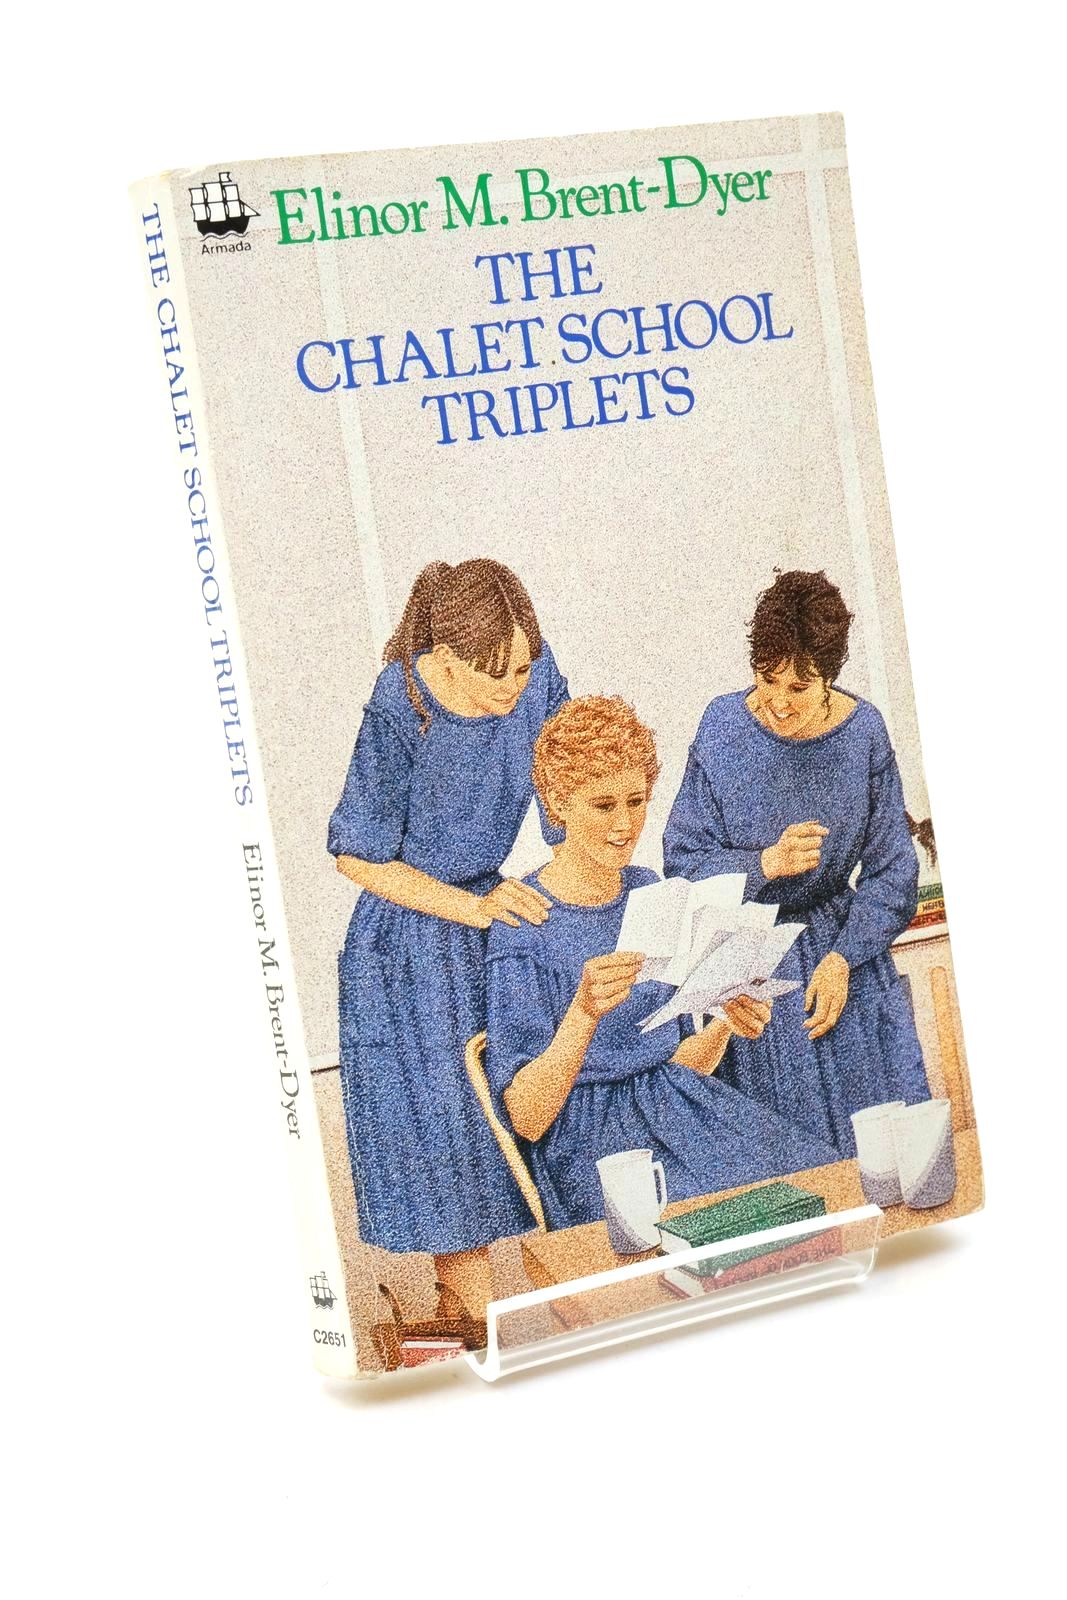 Photo of THE CHALET SCHOOL TRIPLETS written by Brent-Dyer, Elinor M. published by Armada (STOCK CODE: 1322564)  for sale by Stella & Rose's Books